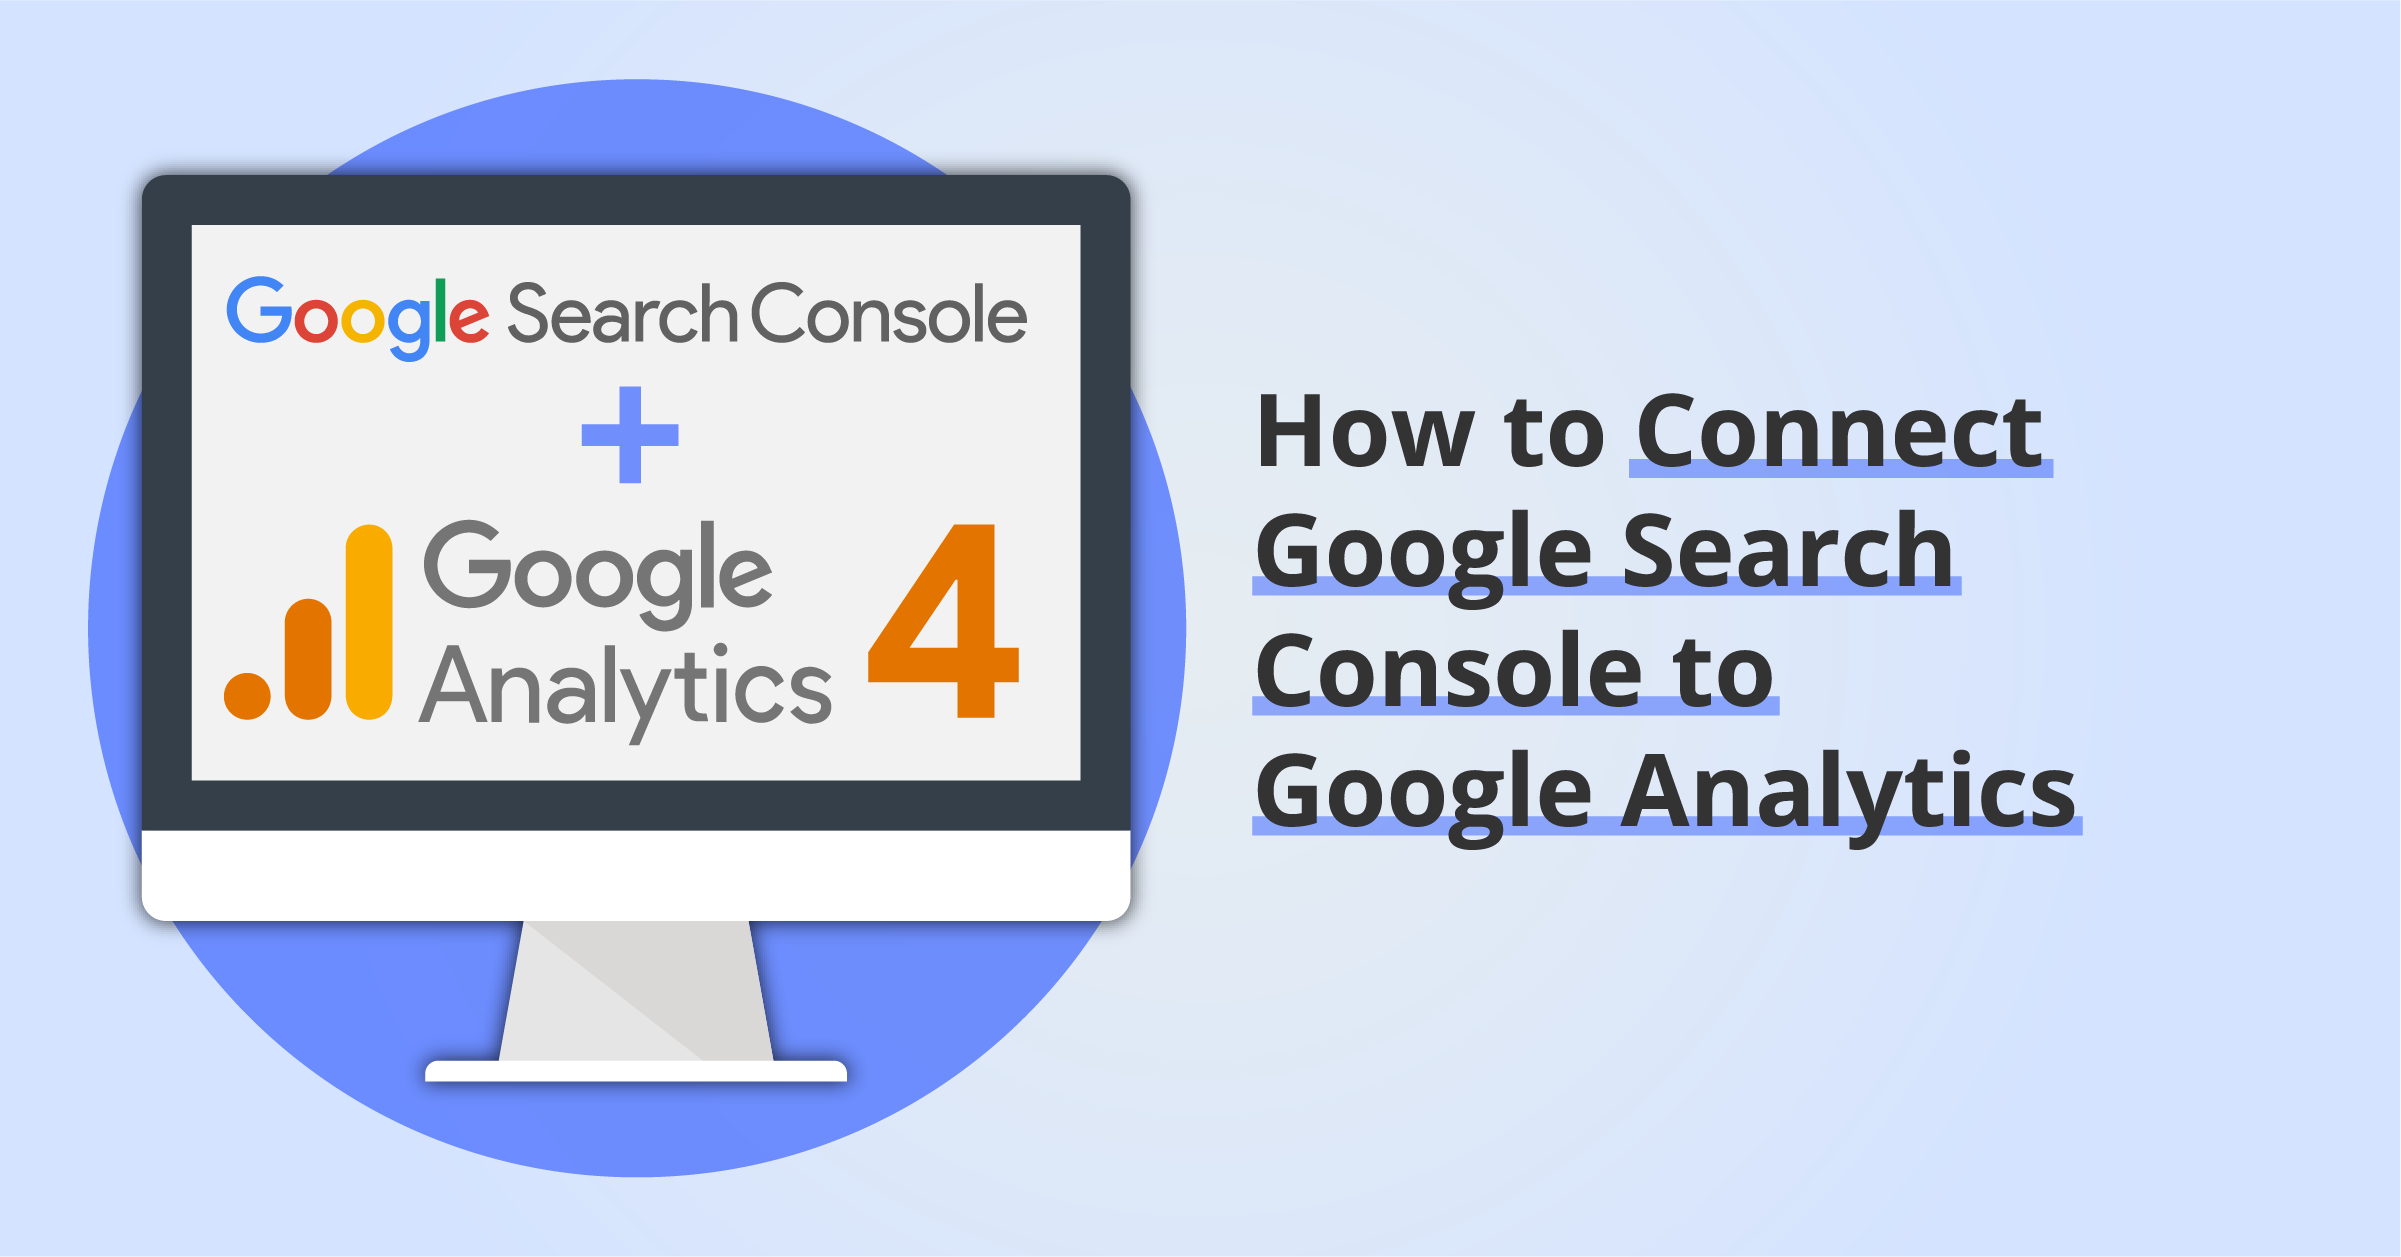 Connect Google Search Console to Google Analytics